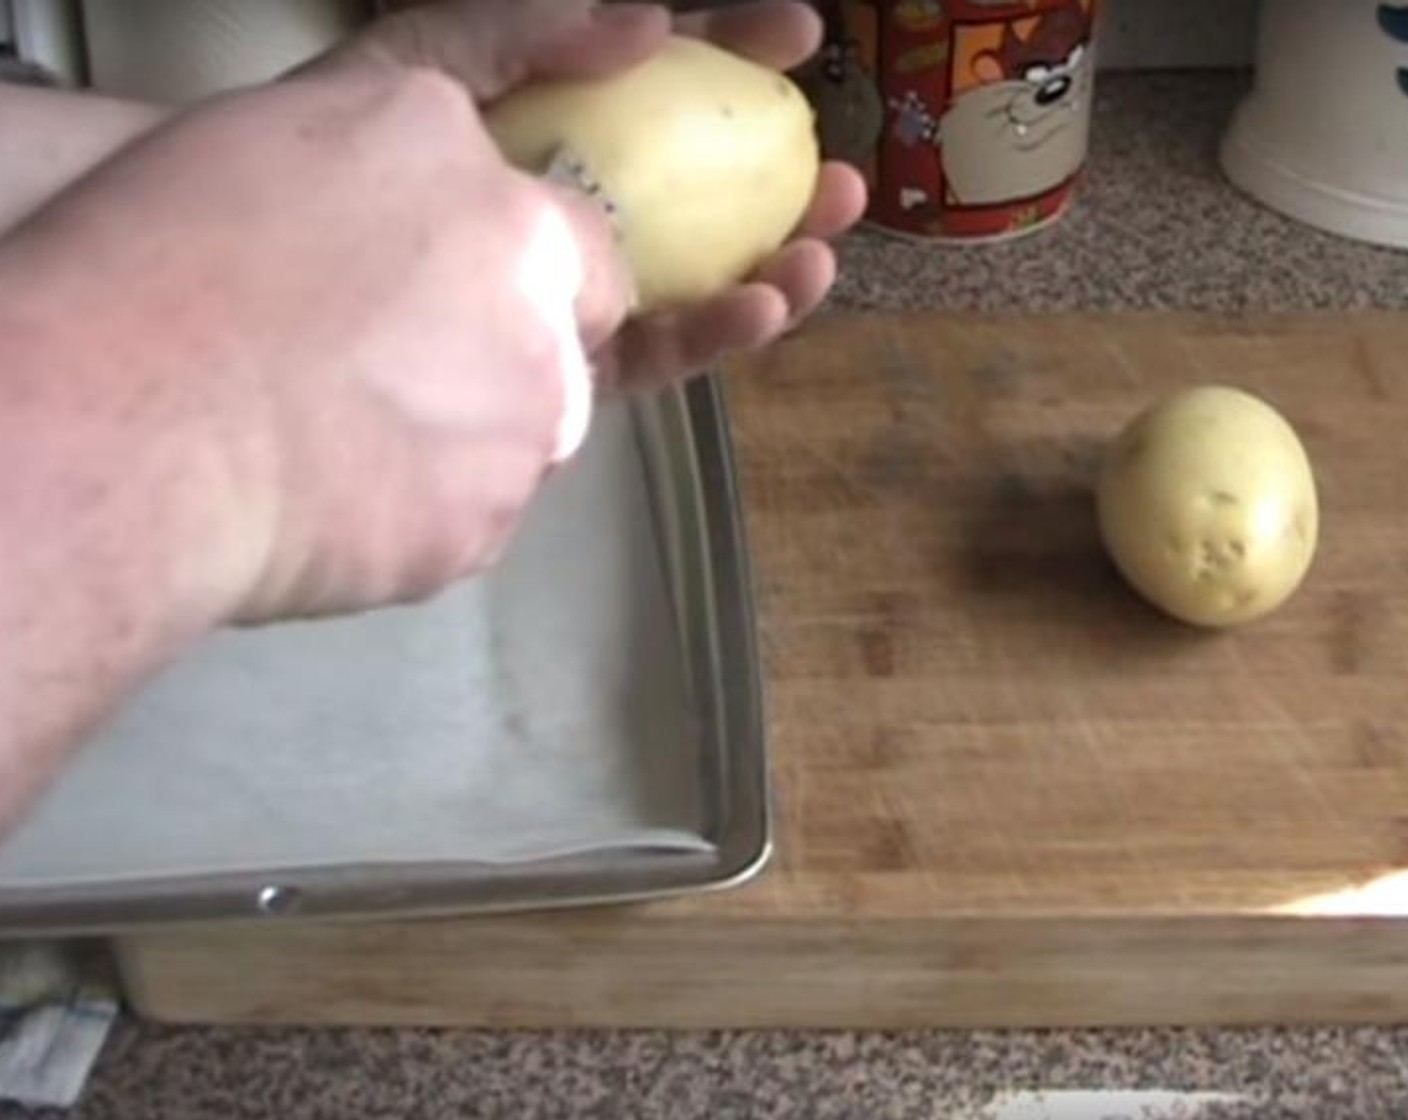 step 1 Wash and scrub the Potatoes (3). Pierce them on the sides with a fork so that they will cook nicely. Pop them on a baking tray. Spray them with Nonstick Cooking Spray (as needed) and lightly season them with Salt (to taste). Put them into the oven at 190 degrees C (375 degrees F) for an hour.